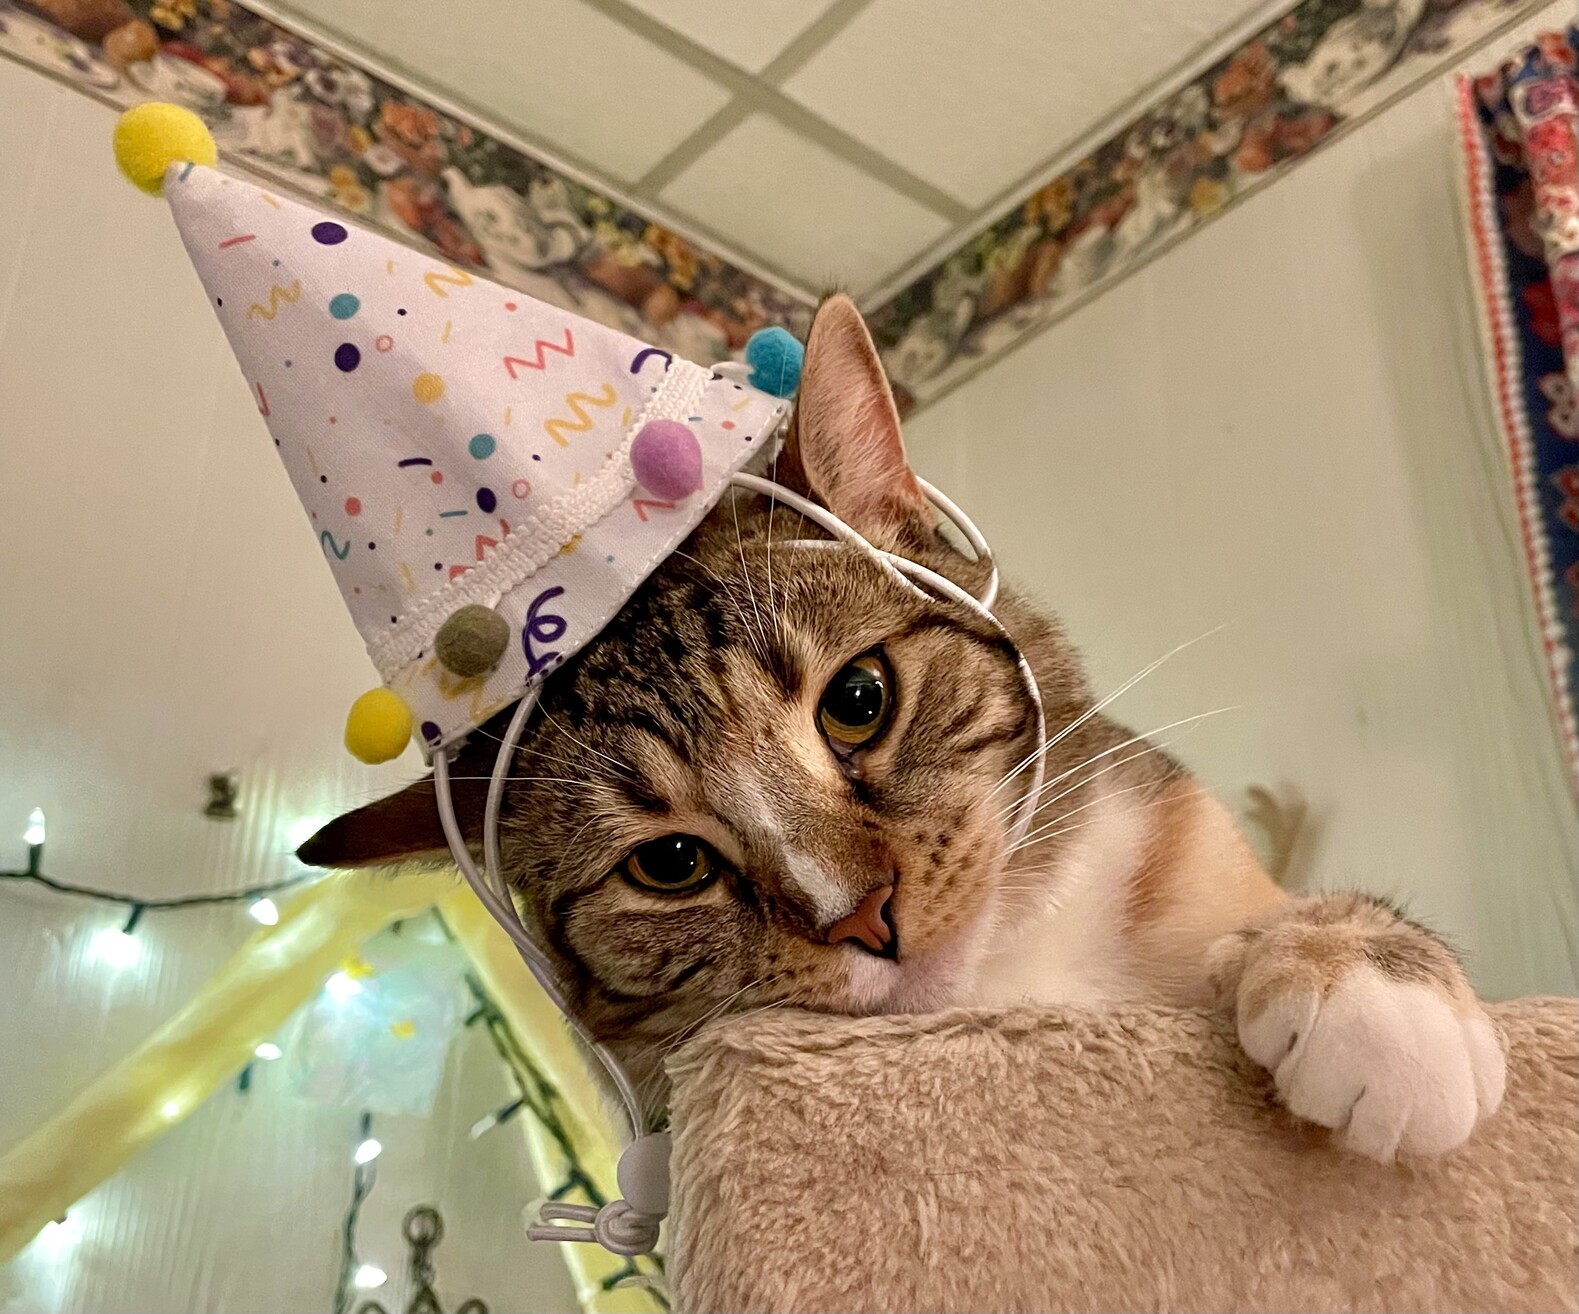 A cute tabby cat, just her head and a little white paw. Honestly she looks even cuter than usual and she’s wearing a white party hat with little pompoms around the base and little dots and squiggles on it in pastel colors, with a yellow pompom on top. She may not be enjoying it